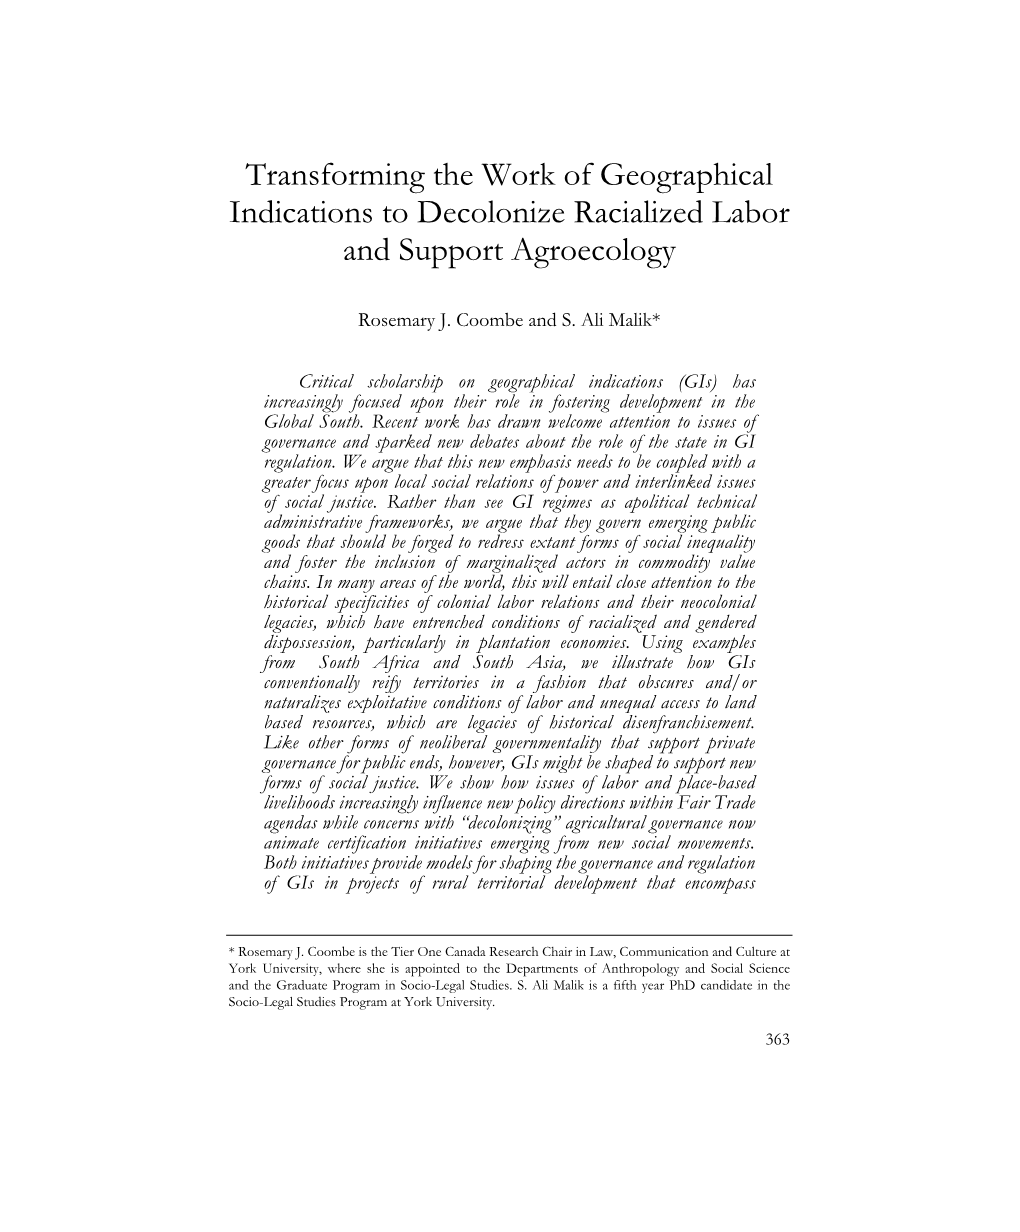 Transforming the Work of Geographical Indications to Decolonize Racialized Labor and Support Agroecology